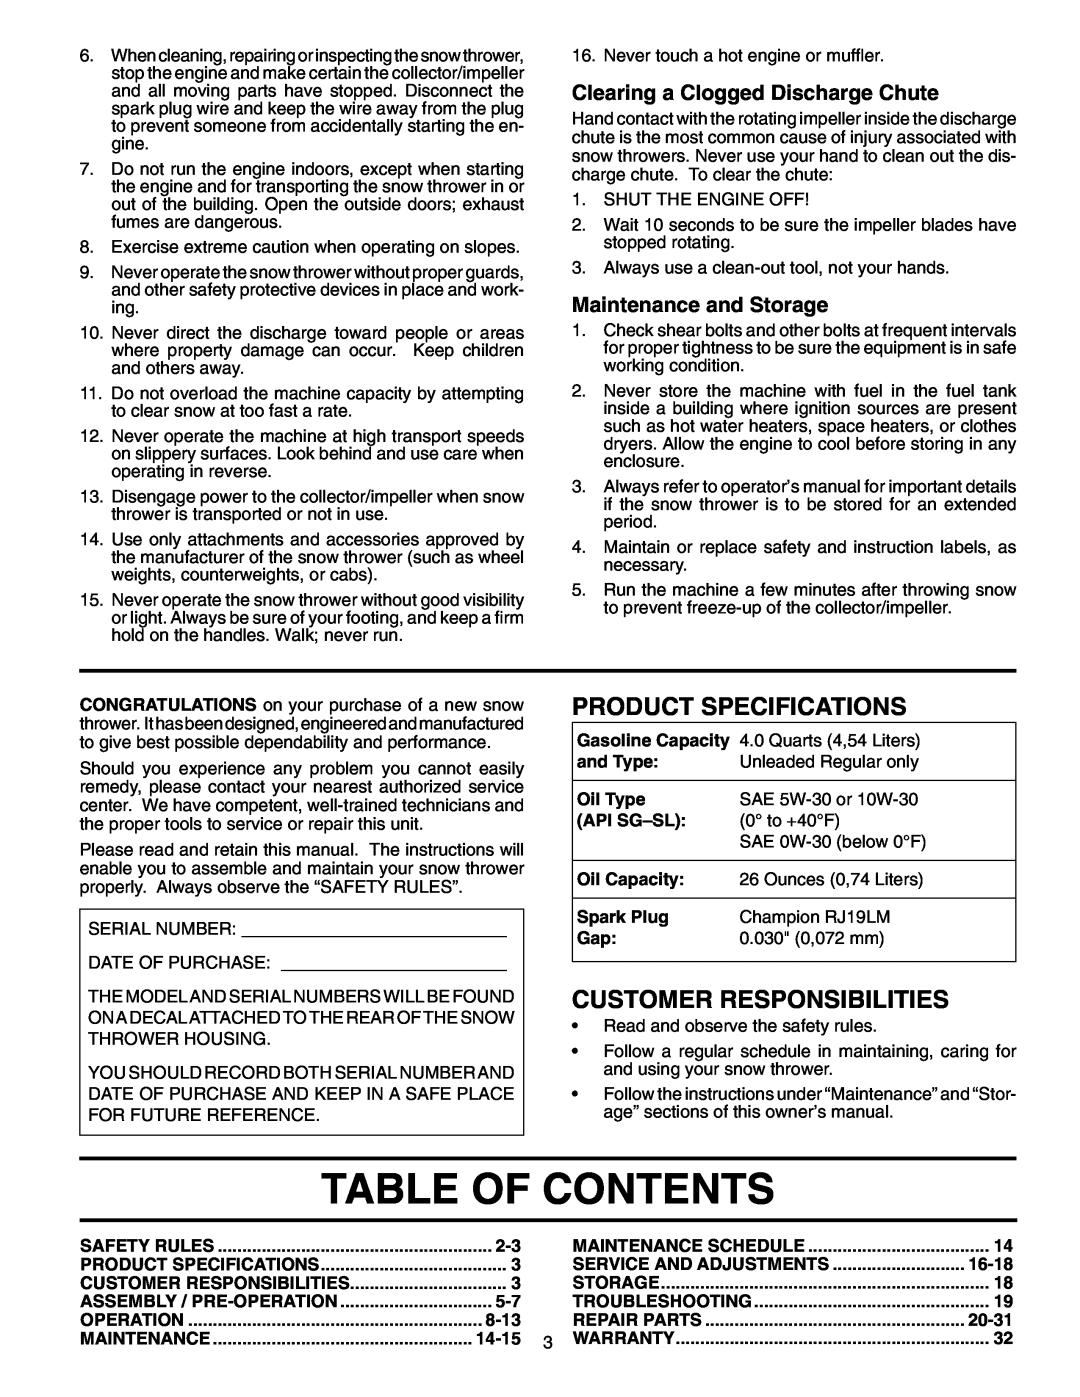 Poulan 406275 Table Of Contents, Product Specifications, Customer Responsibilities, Clearing a Clogged Discharge Chute 